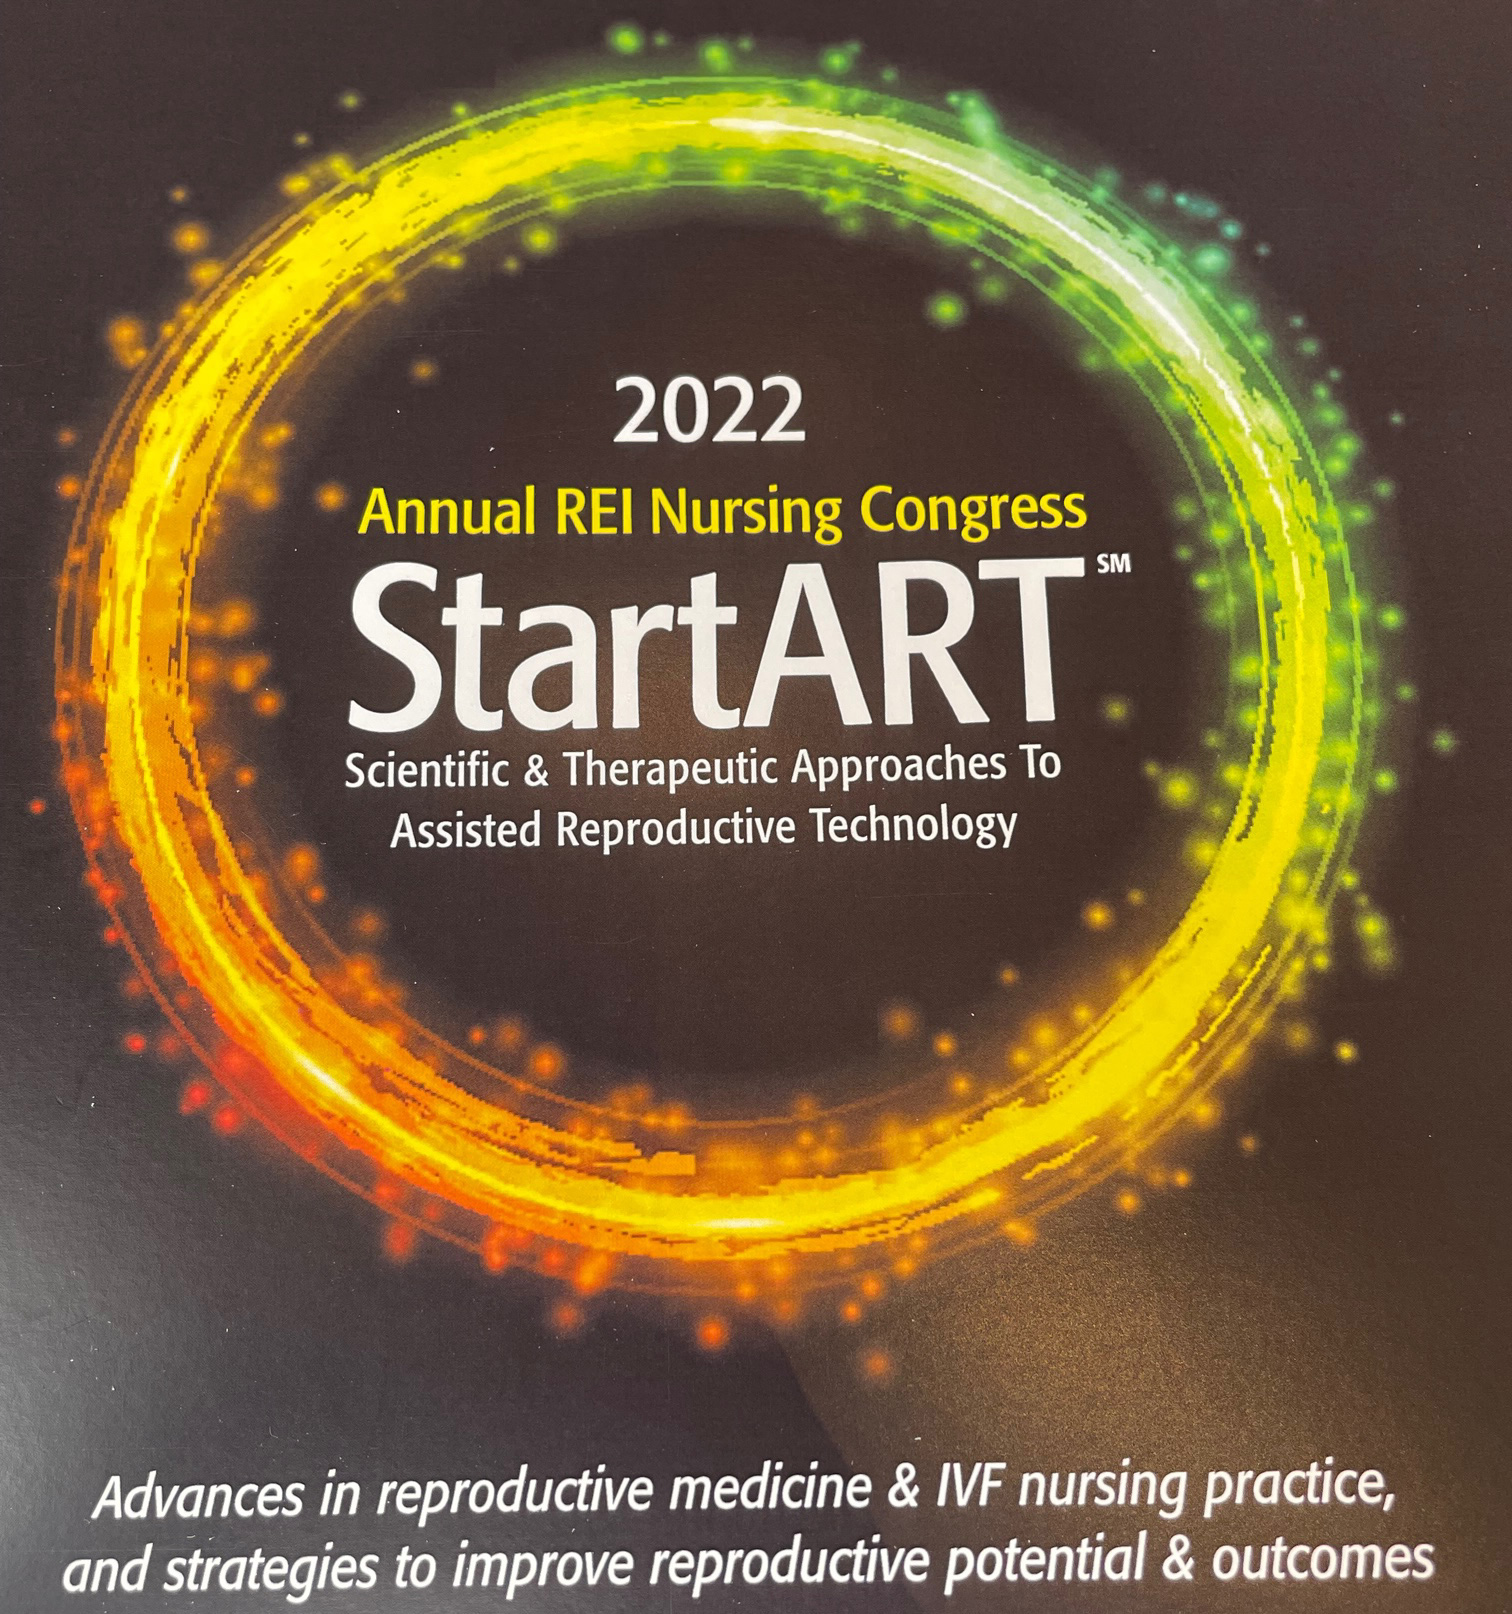 Our Las Vegas fertility doctors shared their knowledge at StartART 2022